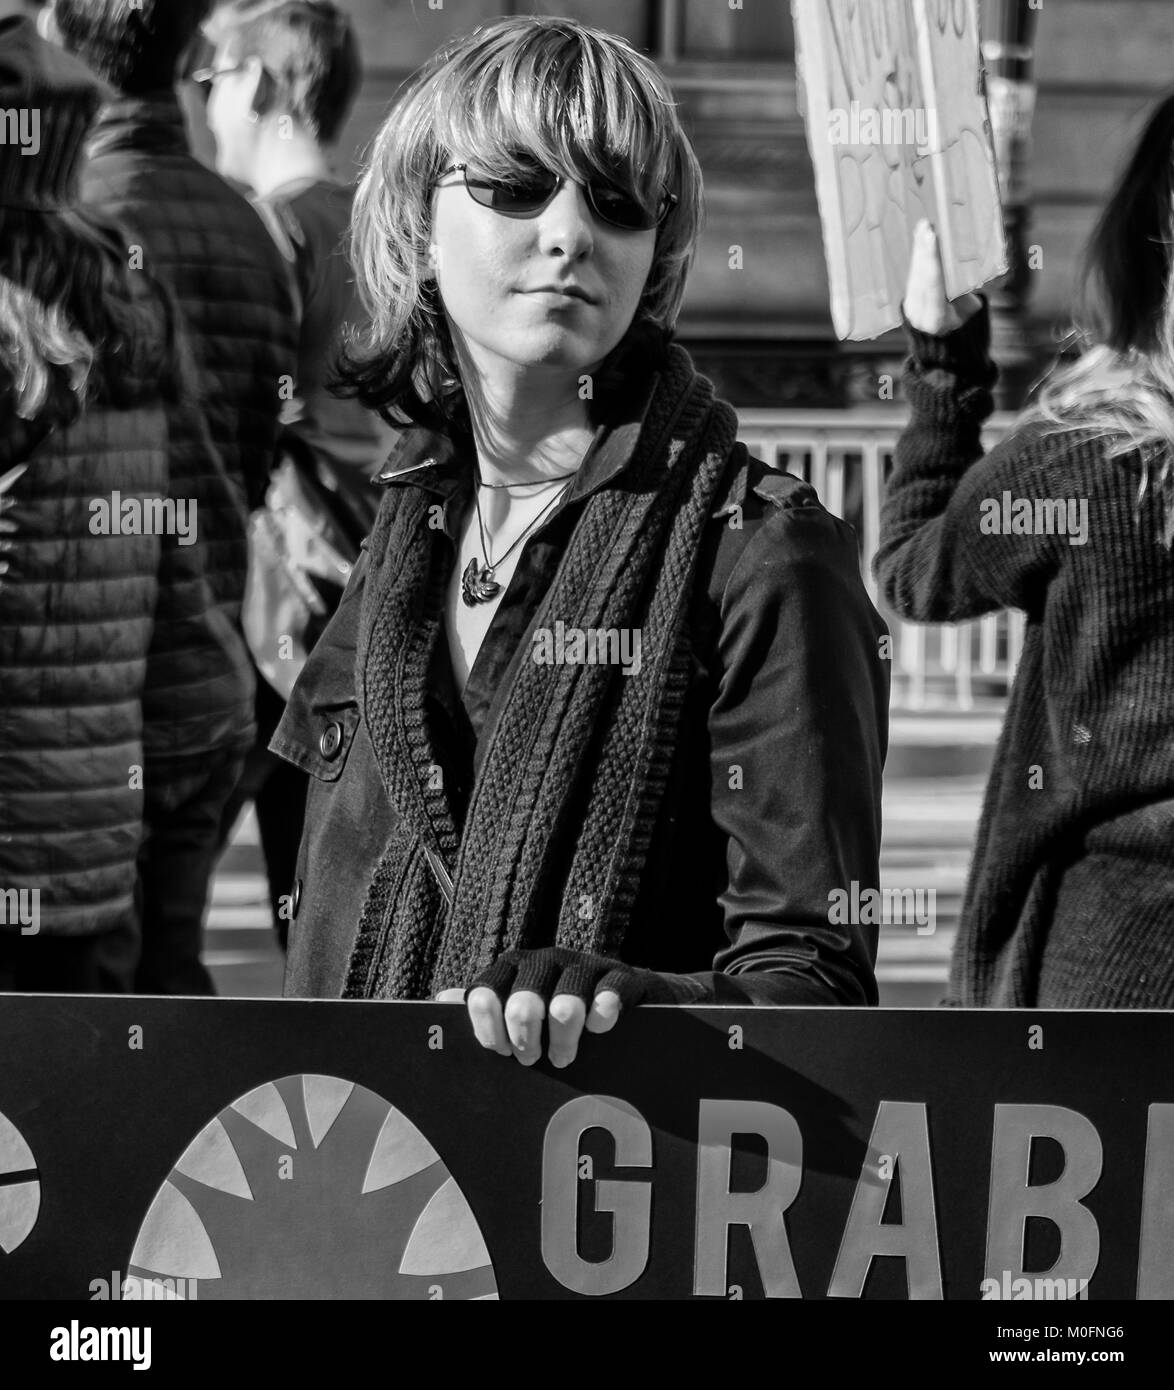 New York, NY - January 20, 2018: More than 120000 people participated in women’s march in New York along streets of Manhattan. Chelsea Manning marches among activists. Stock Photo